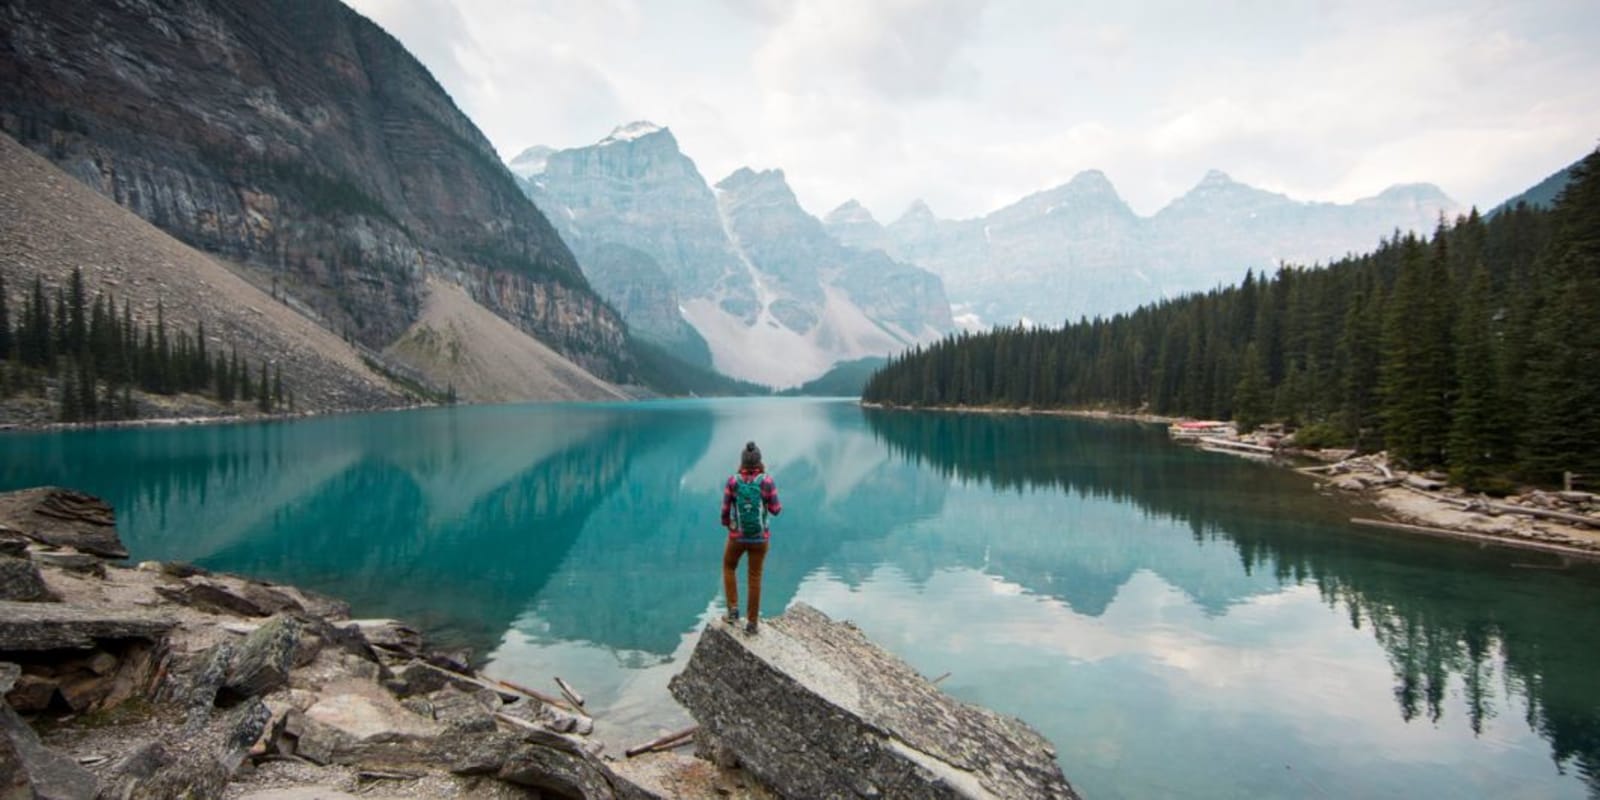 A person standing on a rock looking out over a lake in Canada